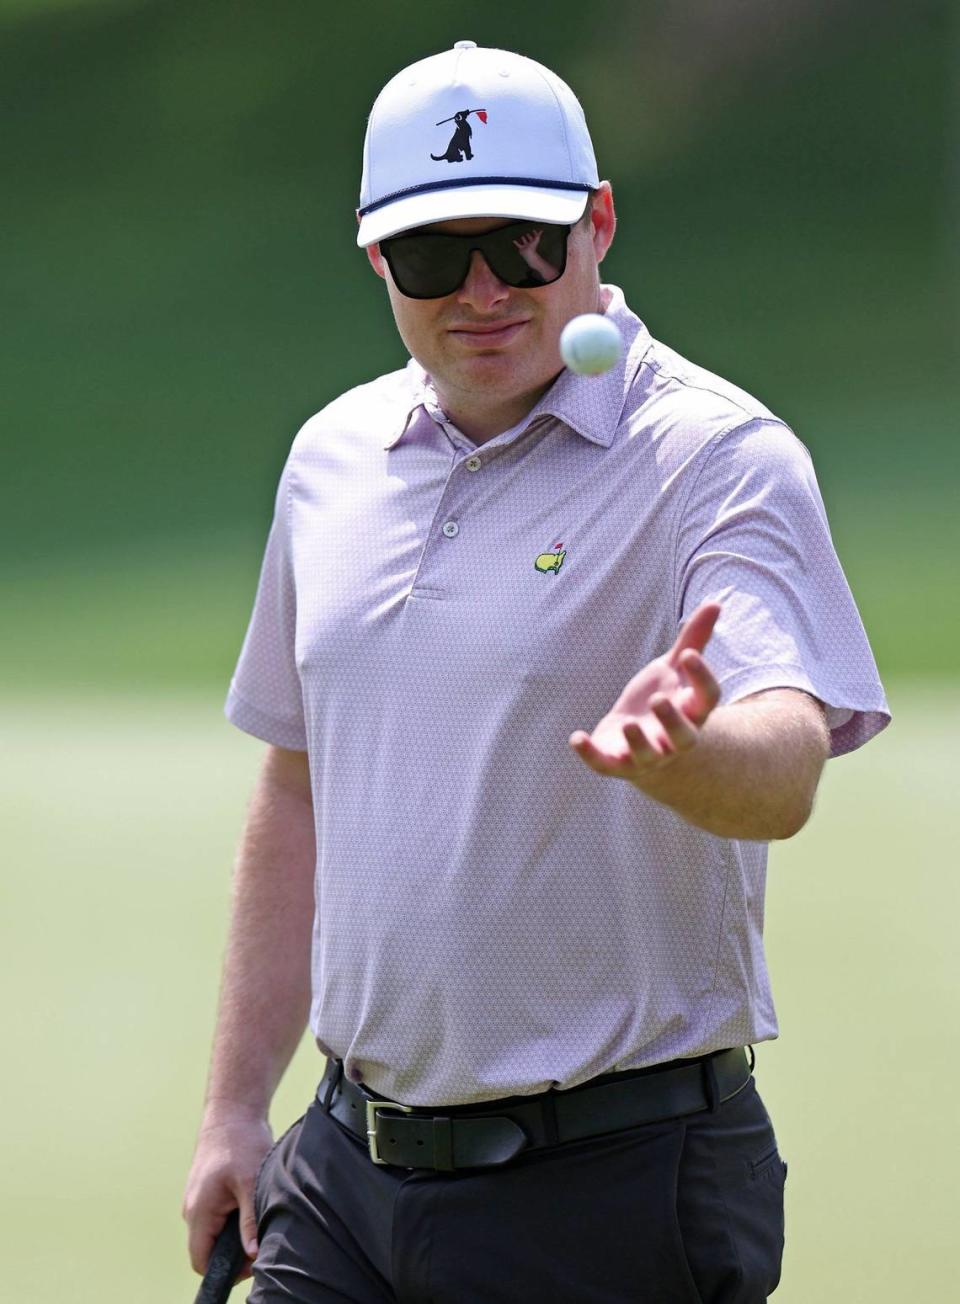 NASCAR Xfinity Series driver Cole Custer reaches out to catch his ball after kicking it up off his putter on the 15th green during the Wells Fargo Championship Pro-Am at Quail Hollow Club on Wednesday, May 8, 2024. JEFF SINER/jsiner@charlotteobserver.com